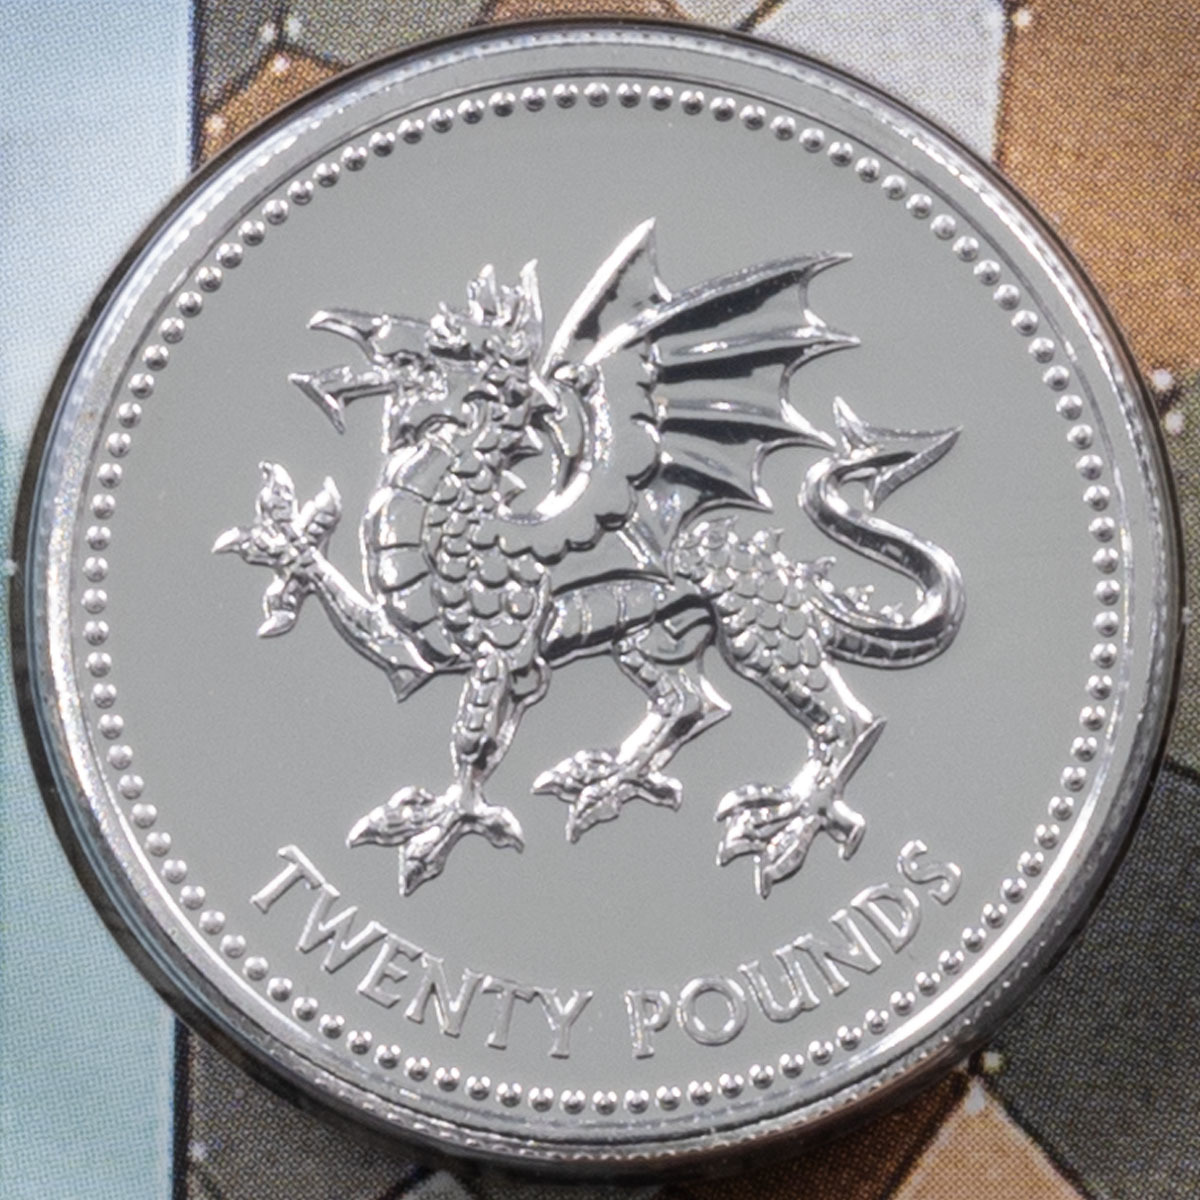 UK17SN20 2017 Welsh Dragon Pride Of Wales Twenty Pound Silver Brilliant Uncirculated Coin In Folder Reverse